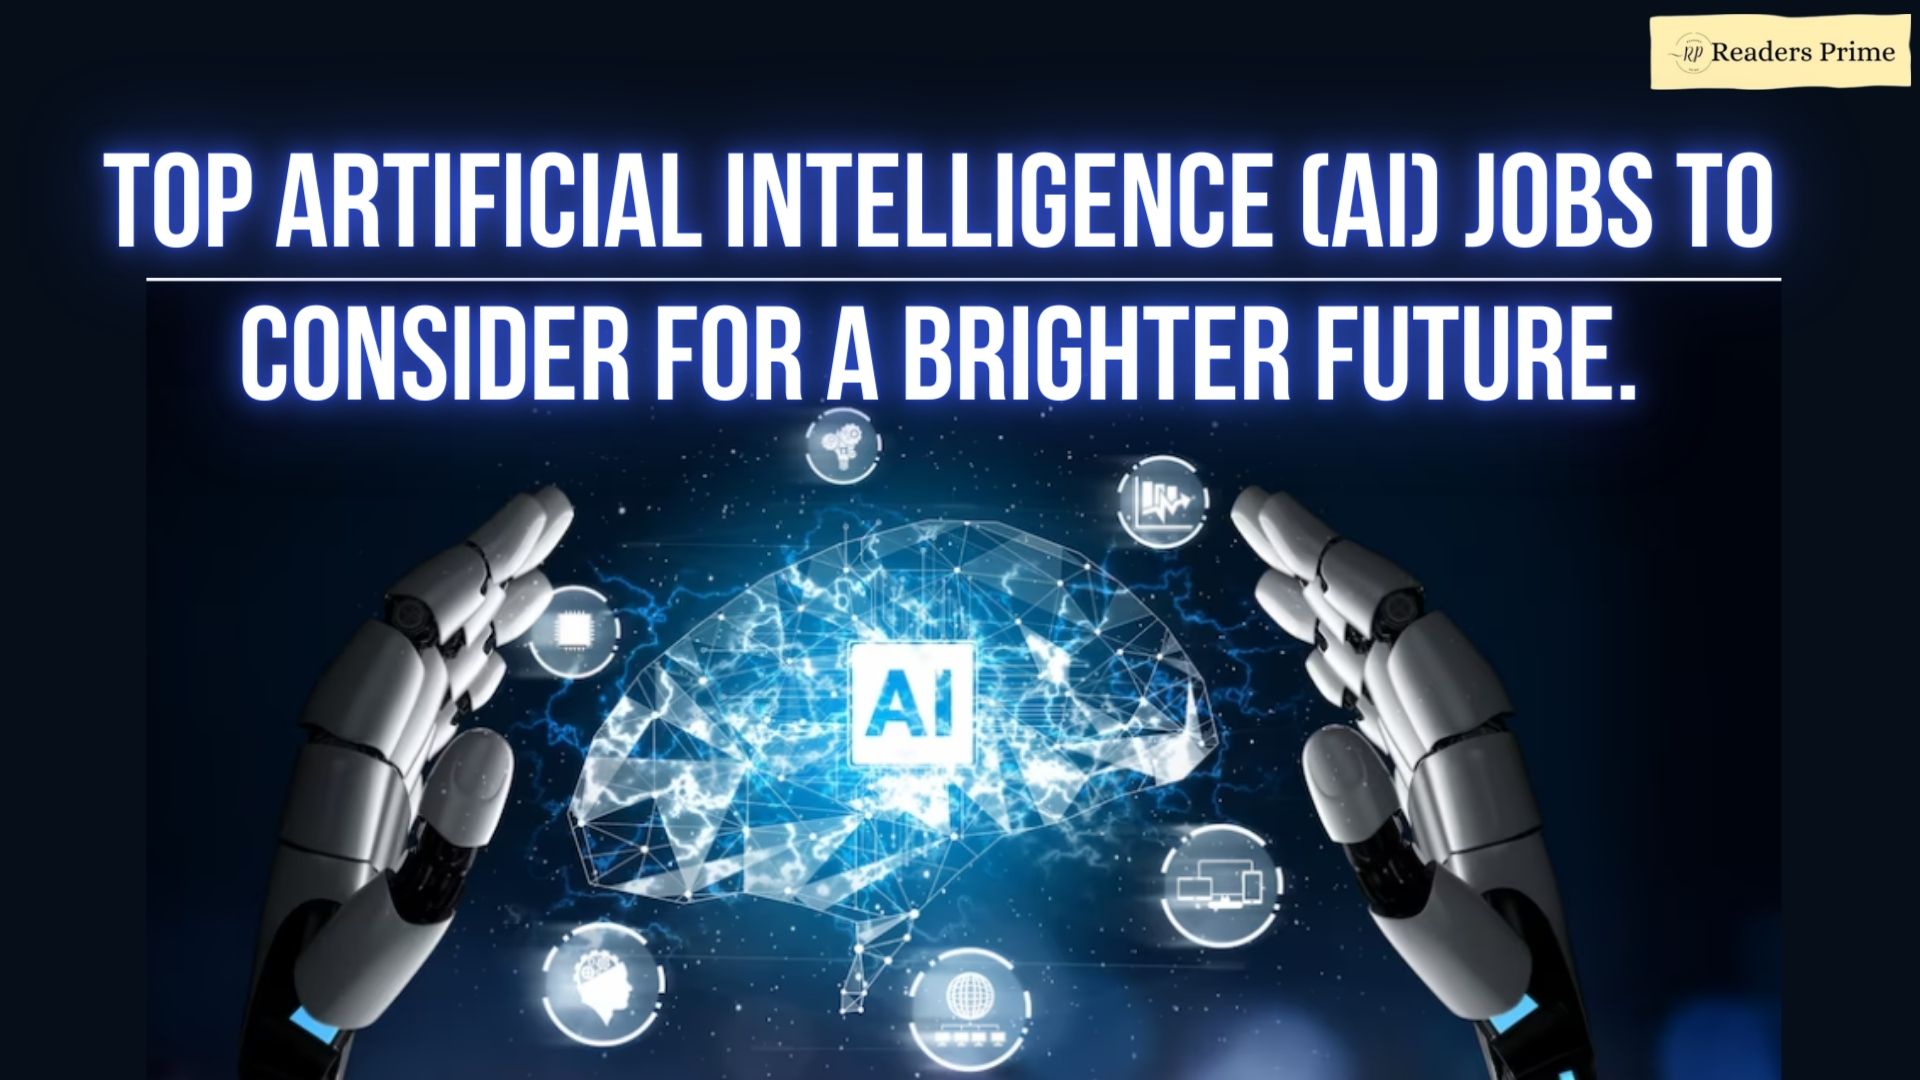 Top Artificial Intelligence (AI) Jobs to Consider for a brighter future